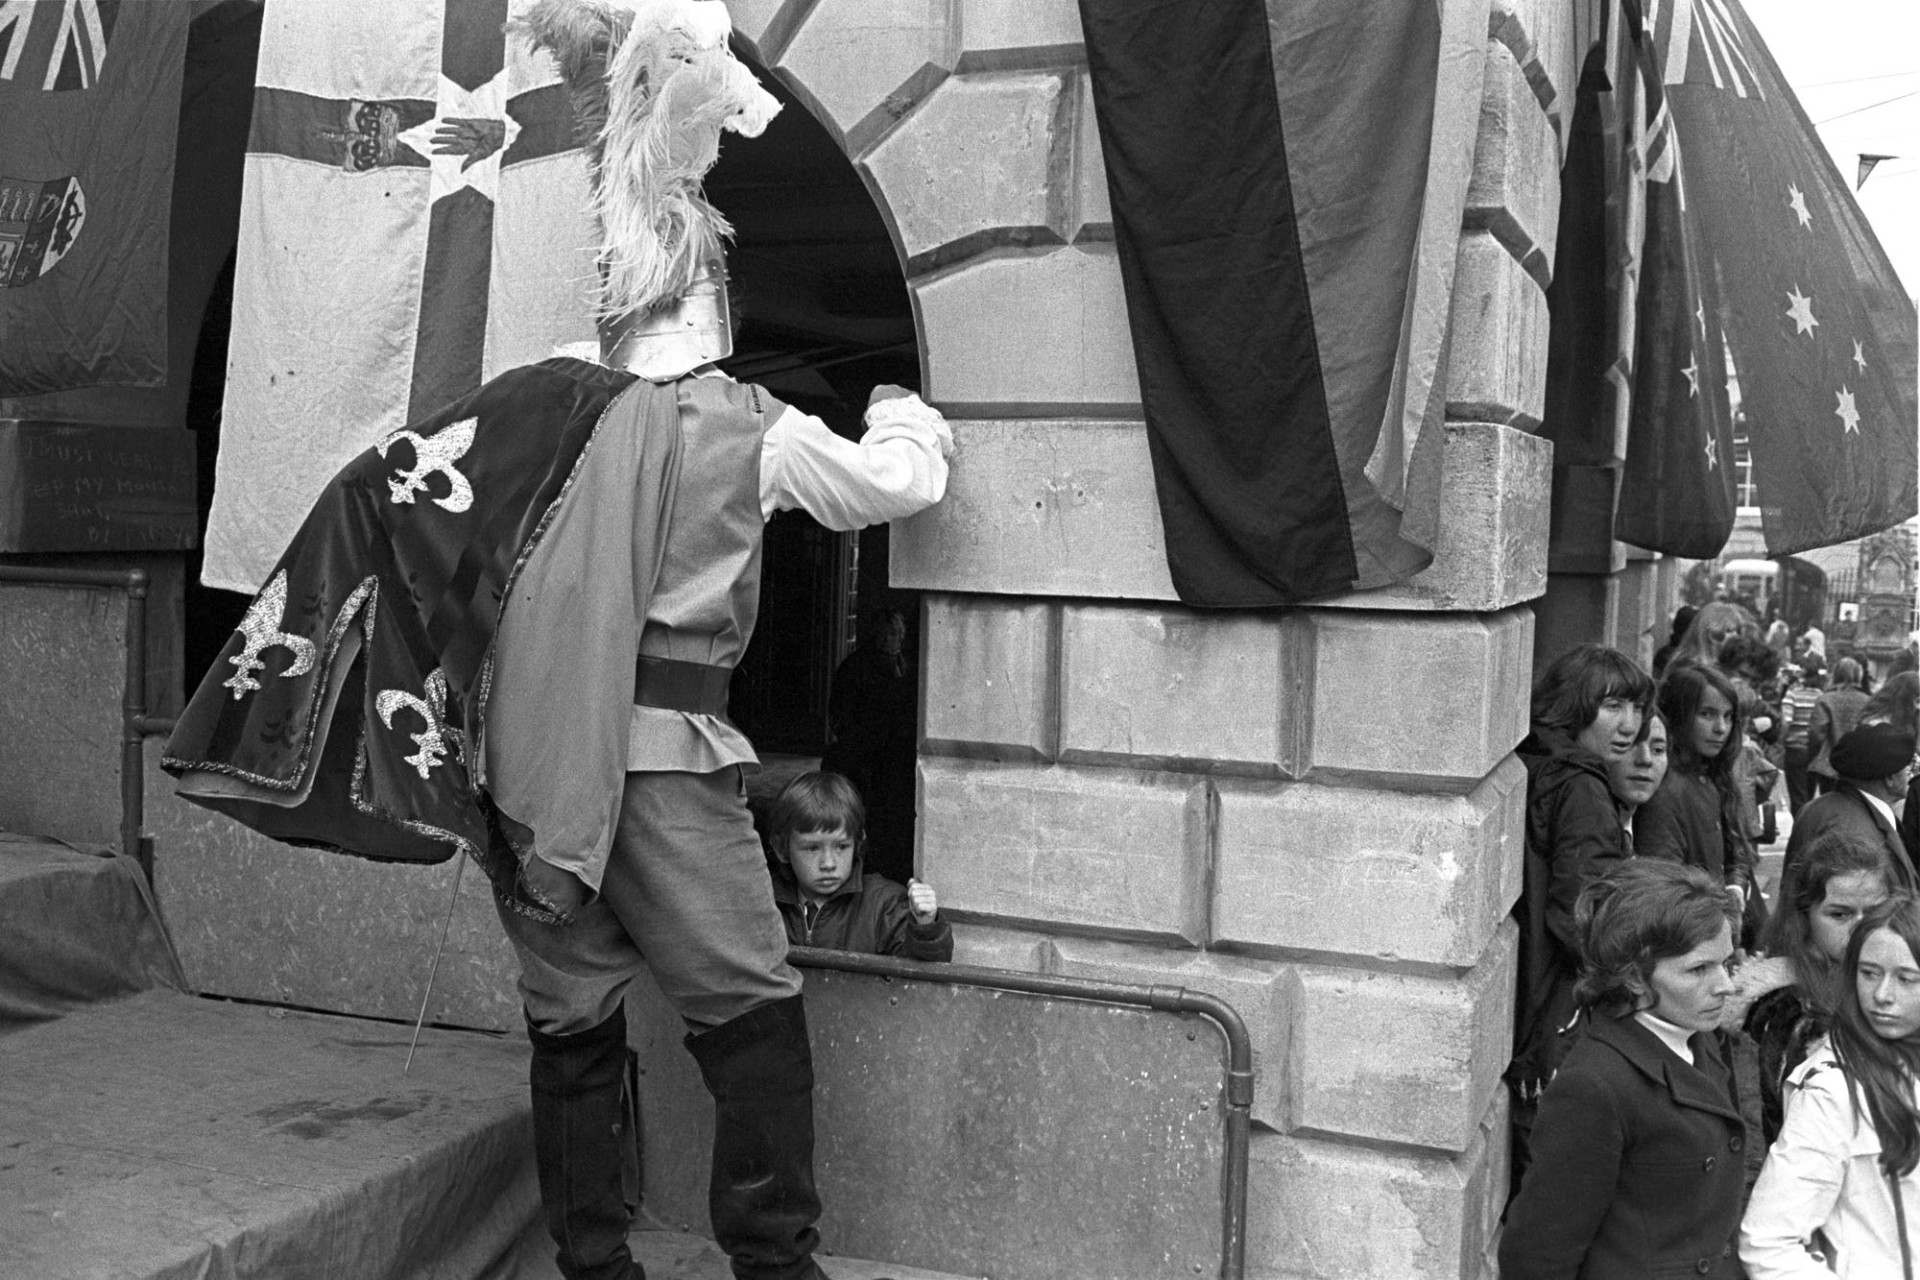 Torrington May Fair. Crowds and performers in High Street.
[People at Torrington May Fair in Torrington High Street. A person dressed as a knight looking into an archway partially covered by a flag, (possibly part of the Town Hall). A child is peering out of the archway.]